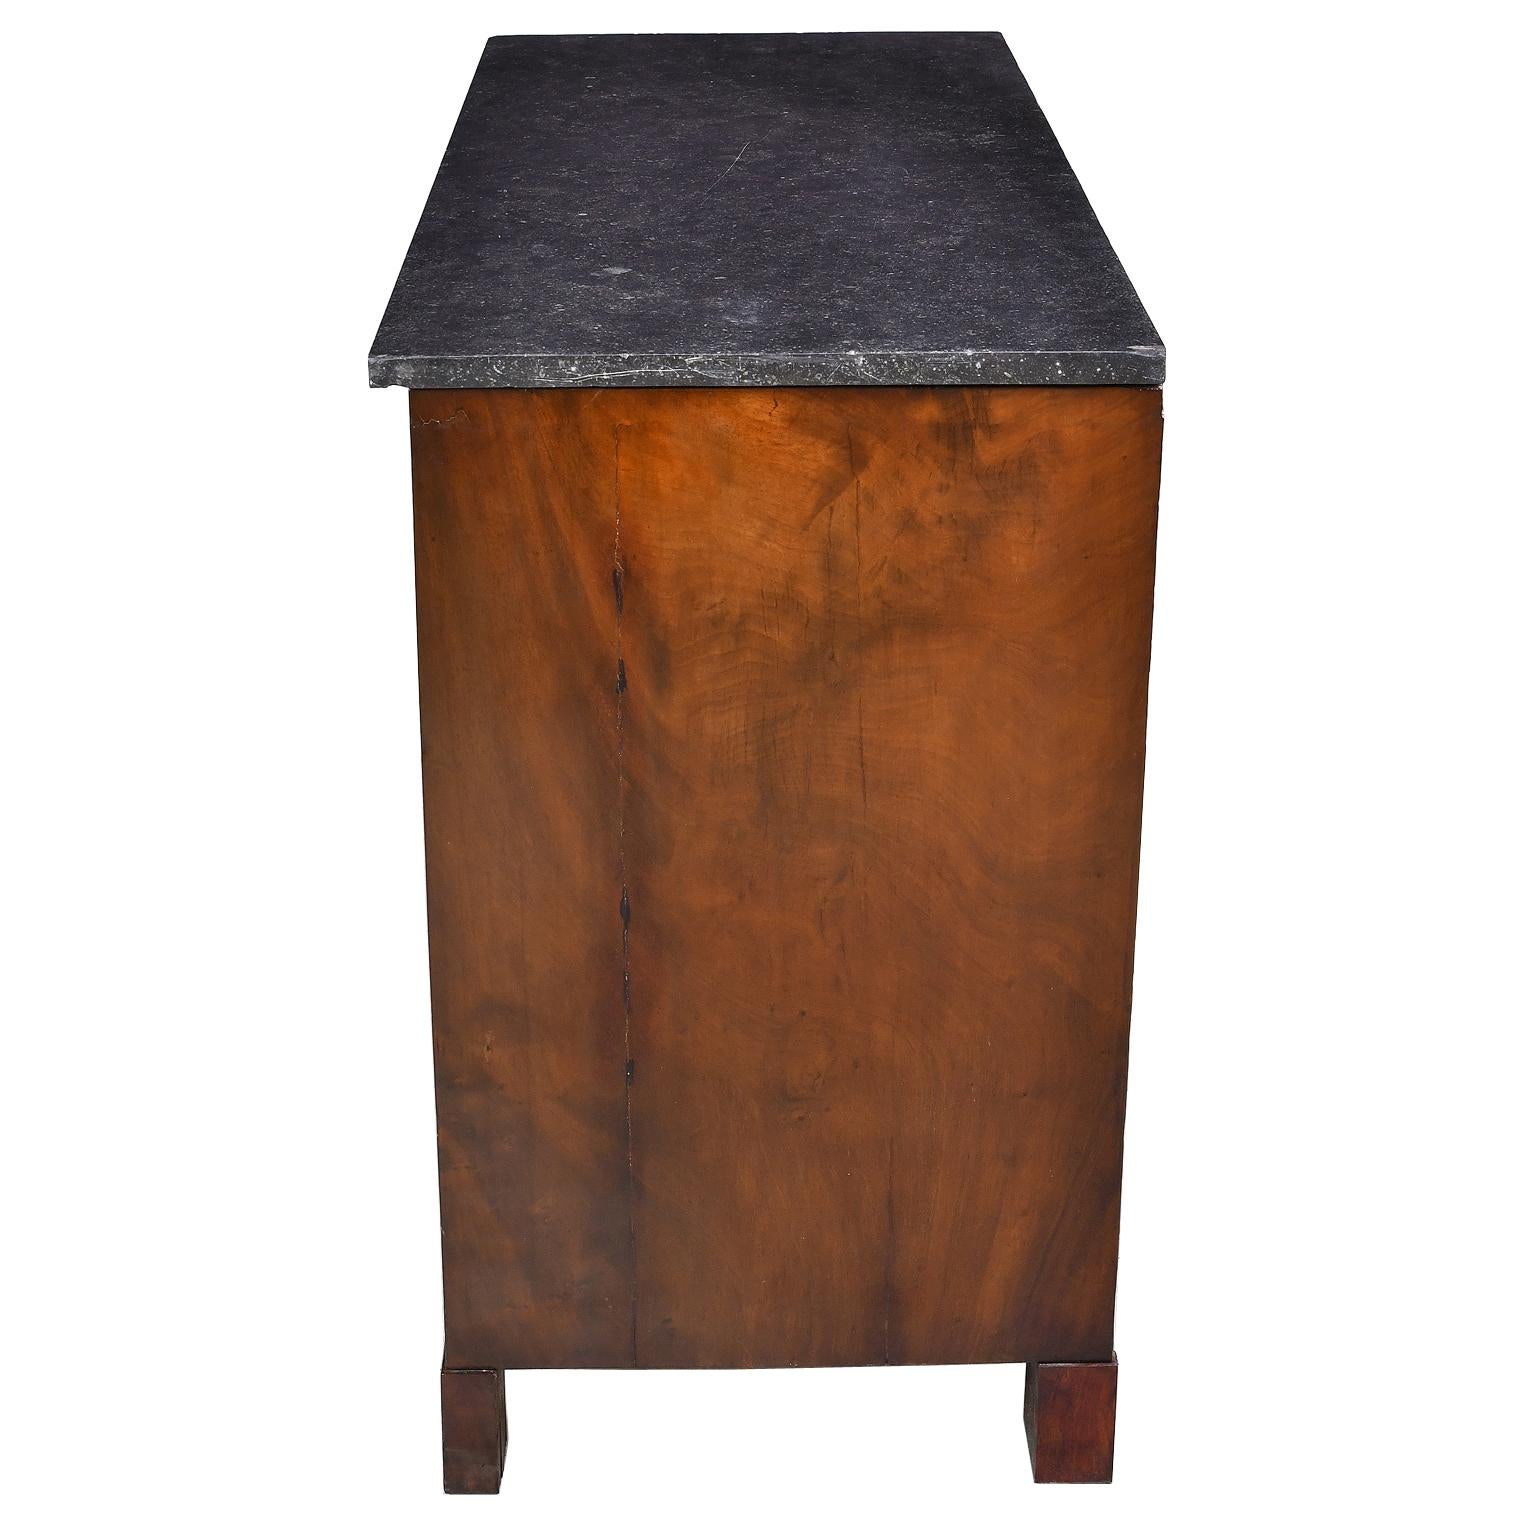 Late 18th Century French Directoire West Indies Mahogany Chest of Drawers with Black Marble